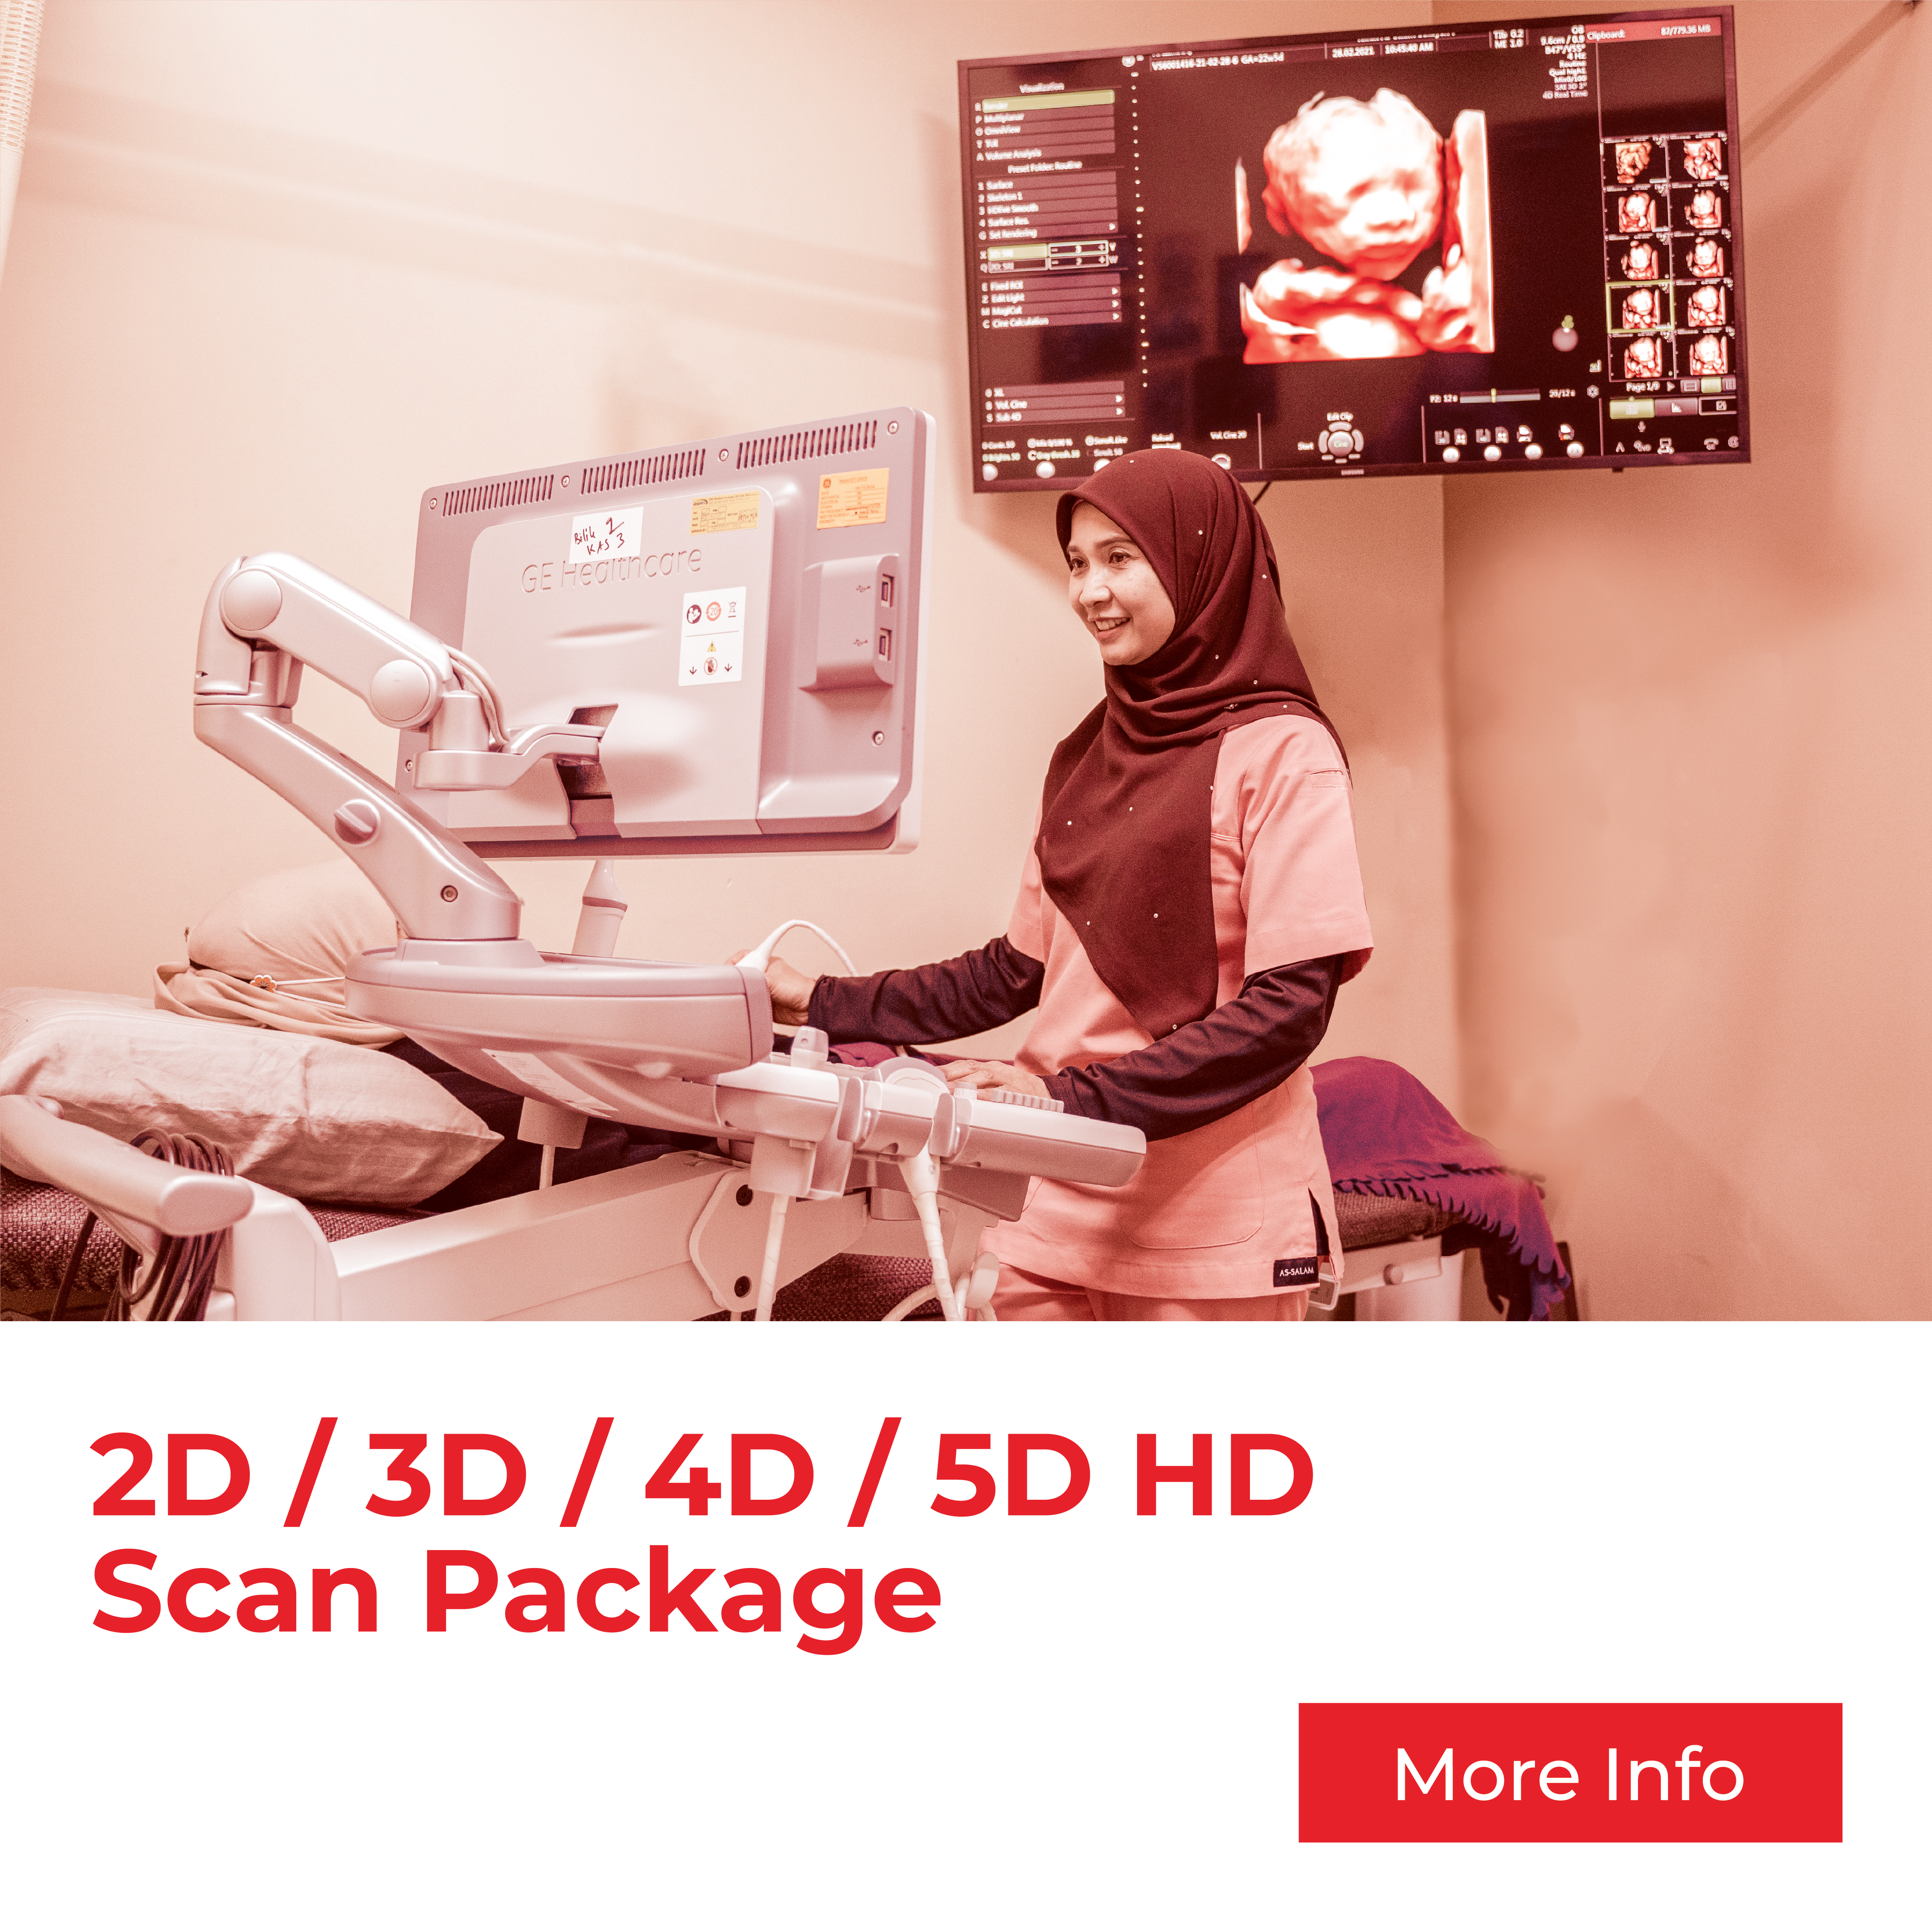 Clinic Ultrasound Scan Package & services in Malaysia - 2D/3D/4D/5D scan by Klinik As Salam